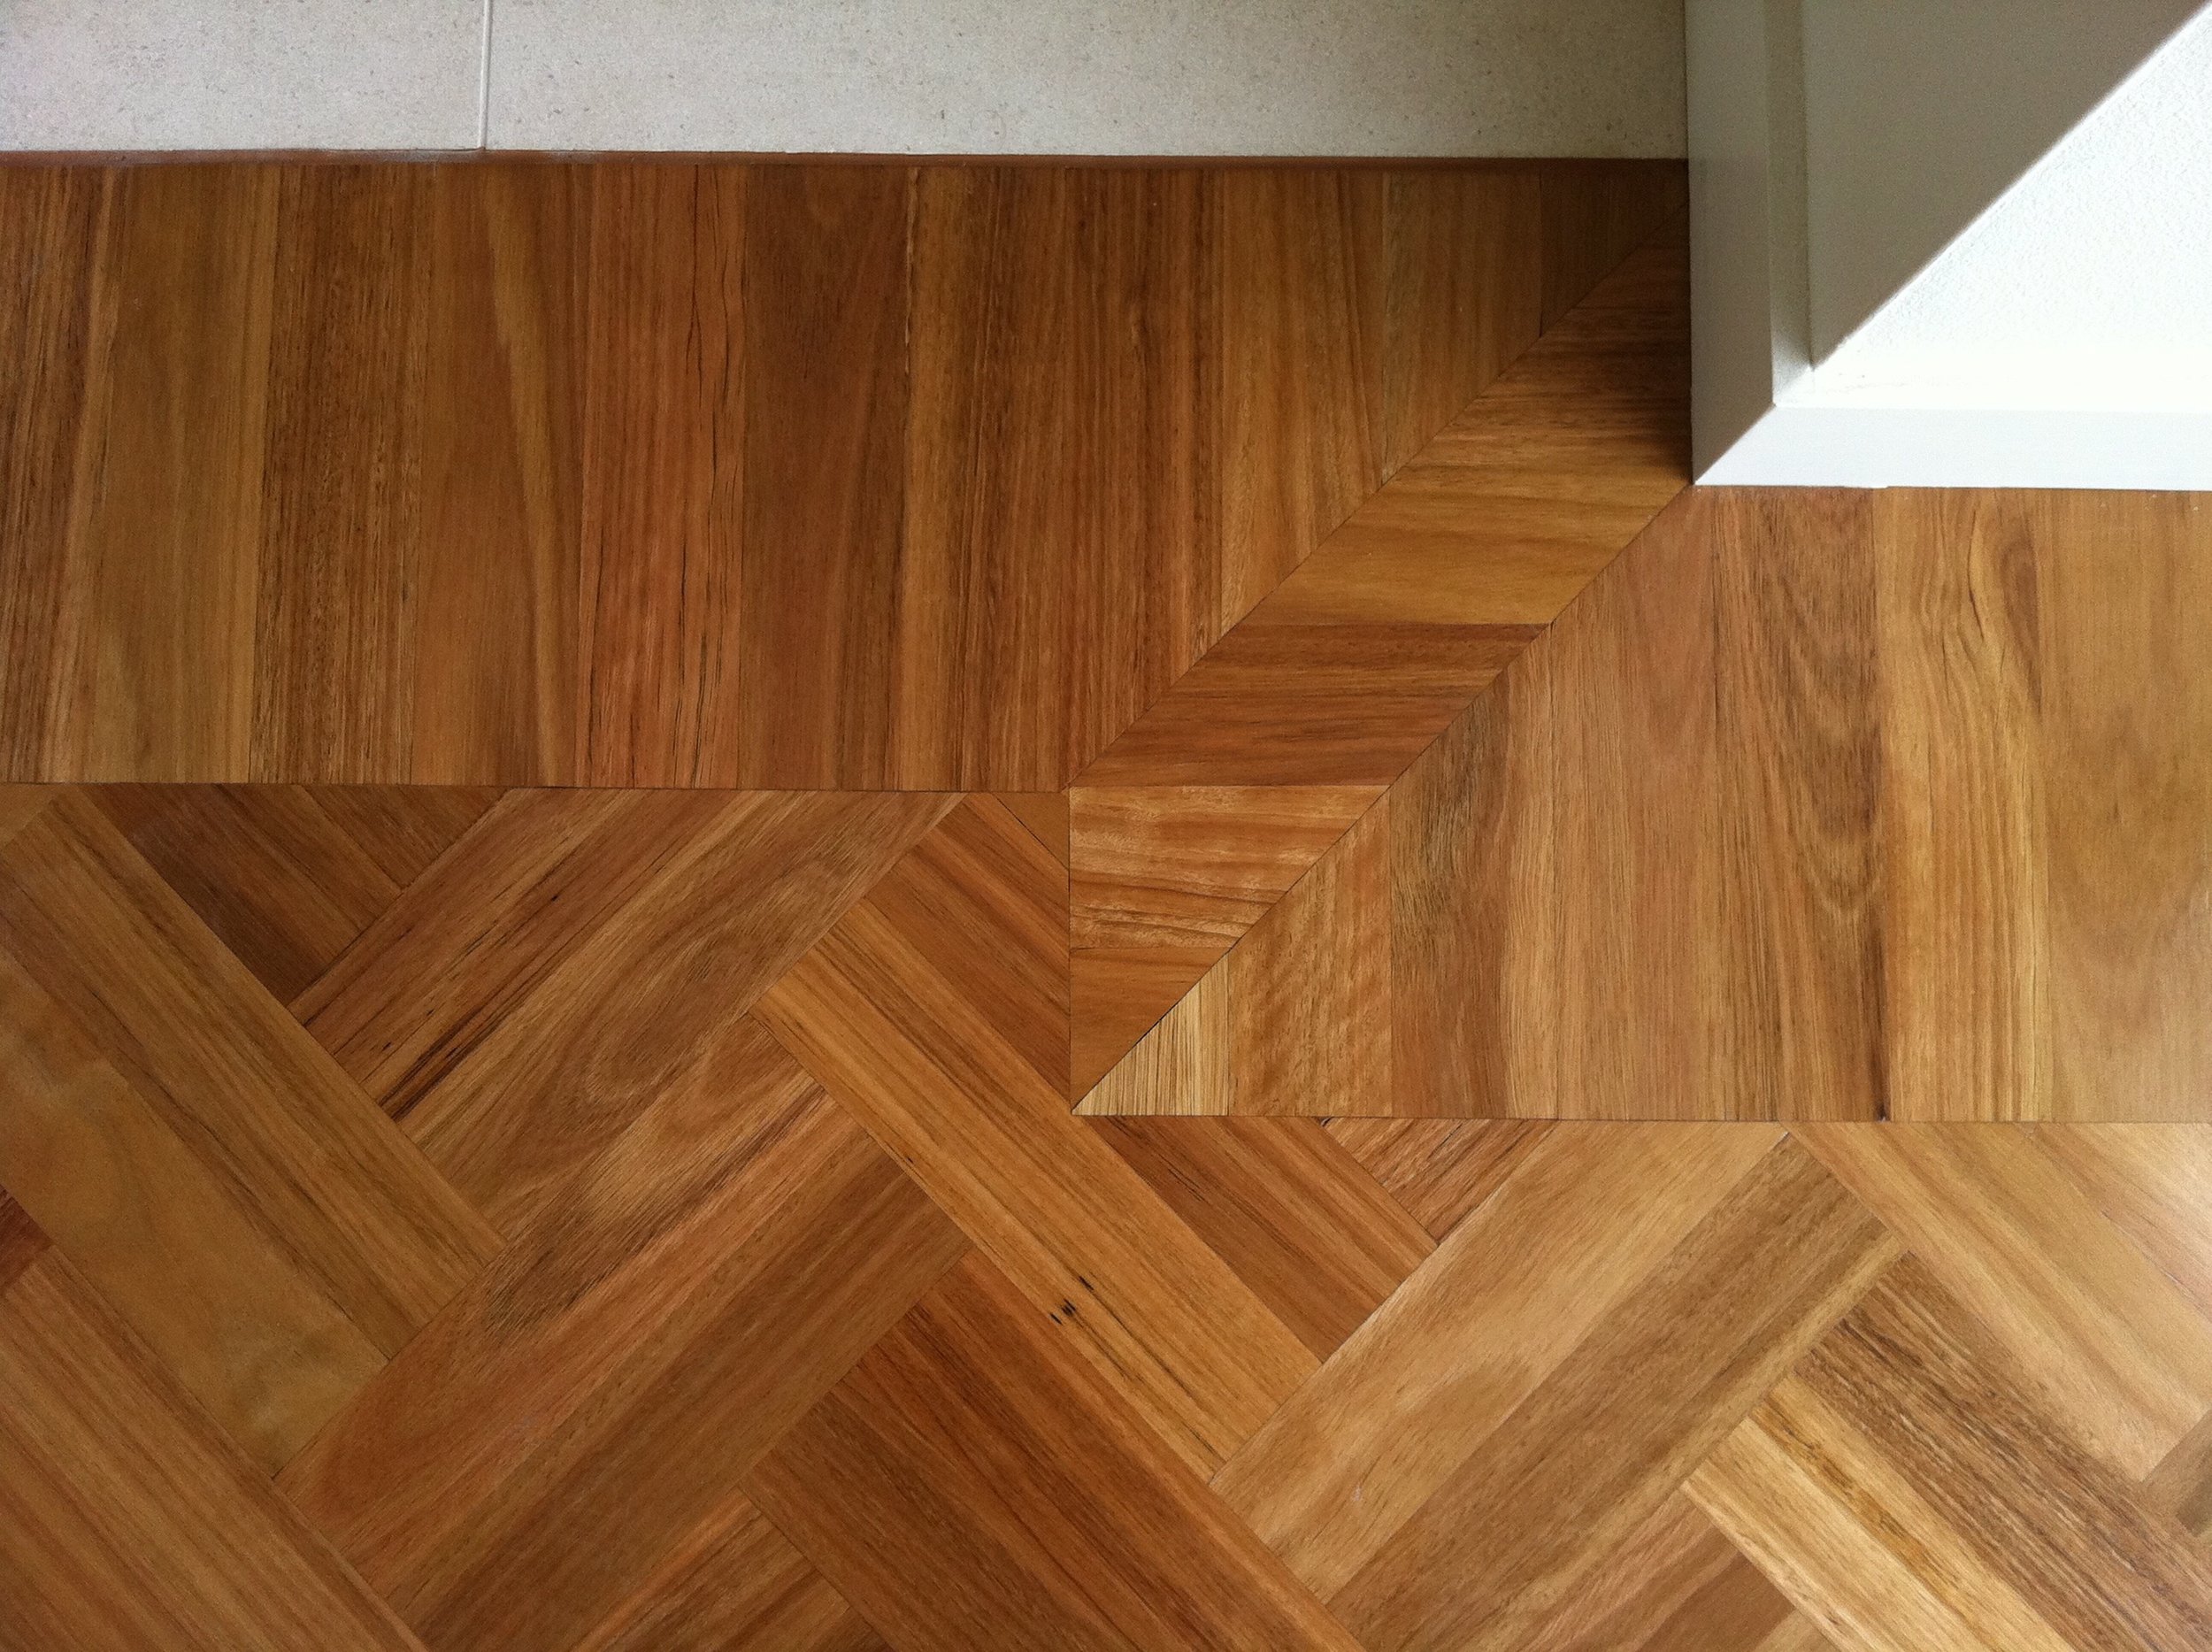  Blackbutt laid in double herringbone pattern with a soldier course border 